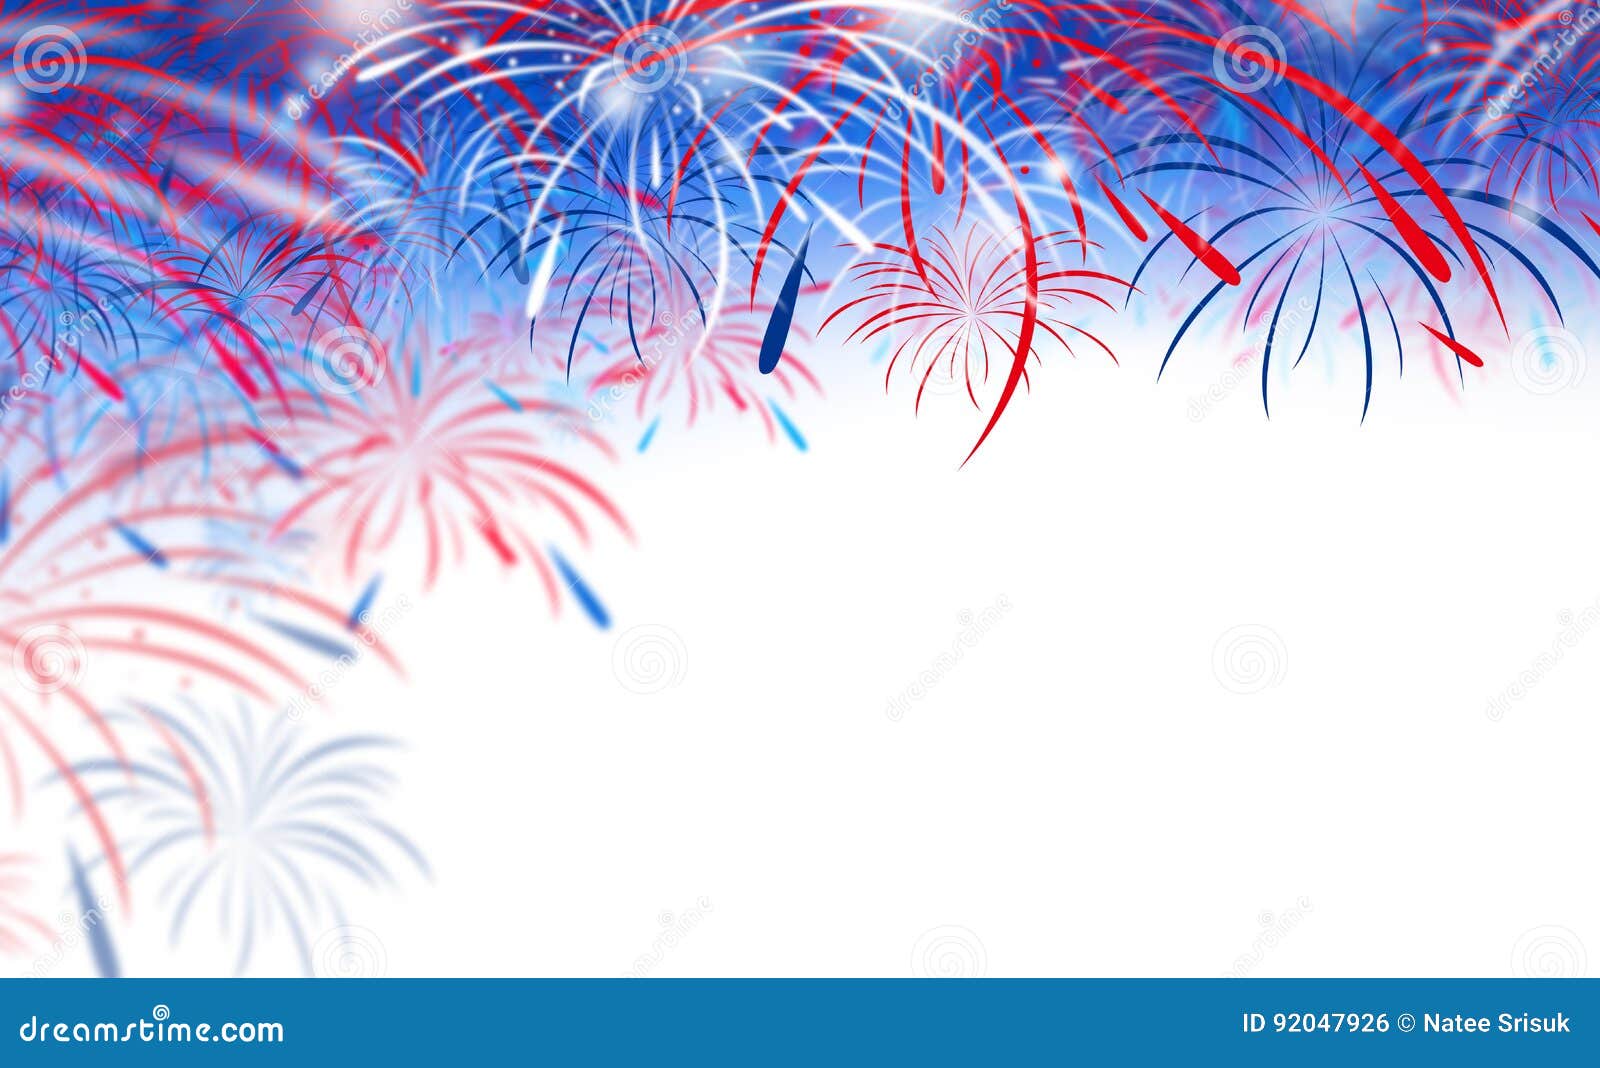 fireworks hd with white background